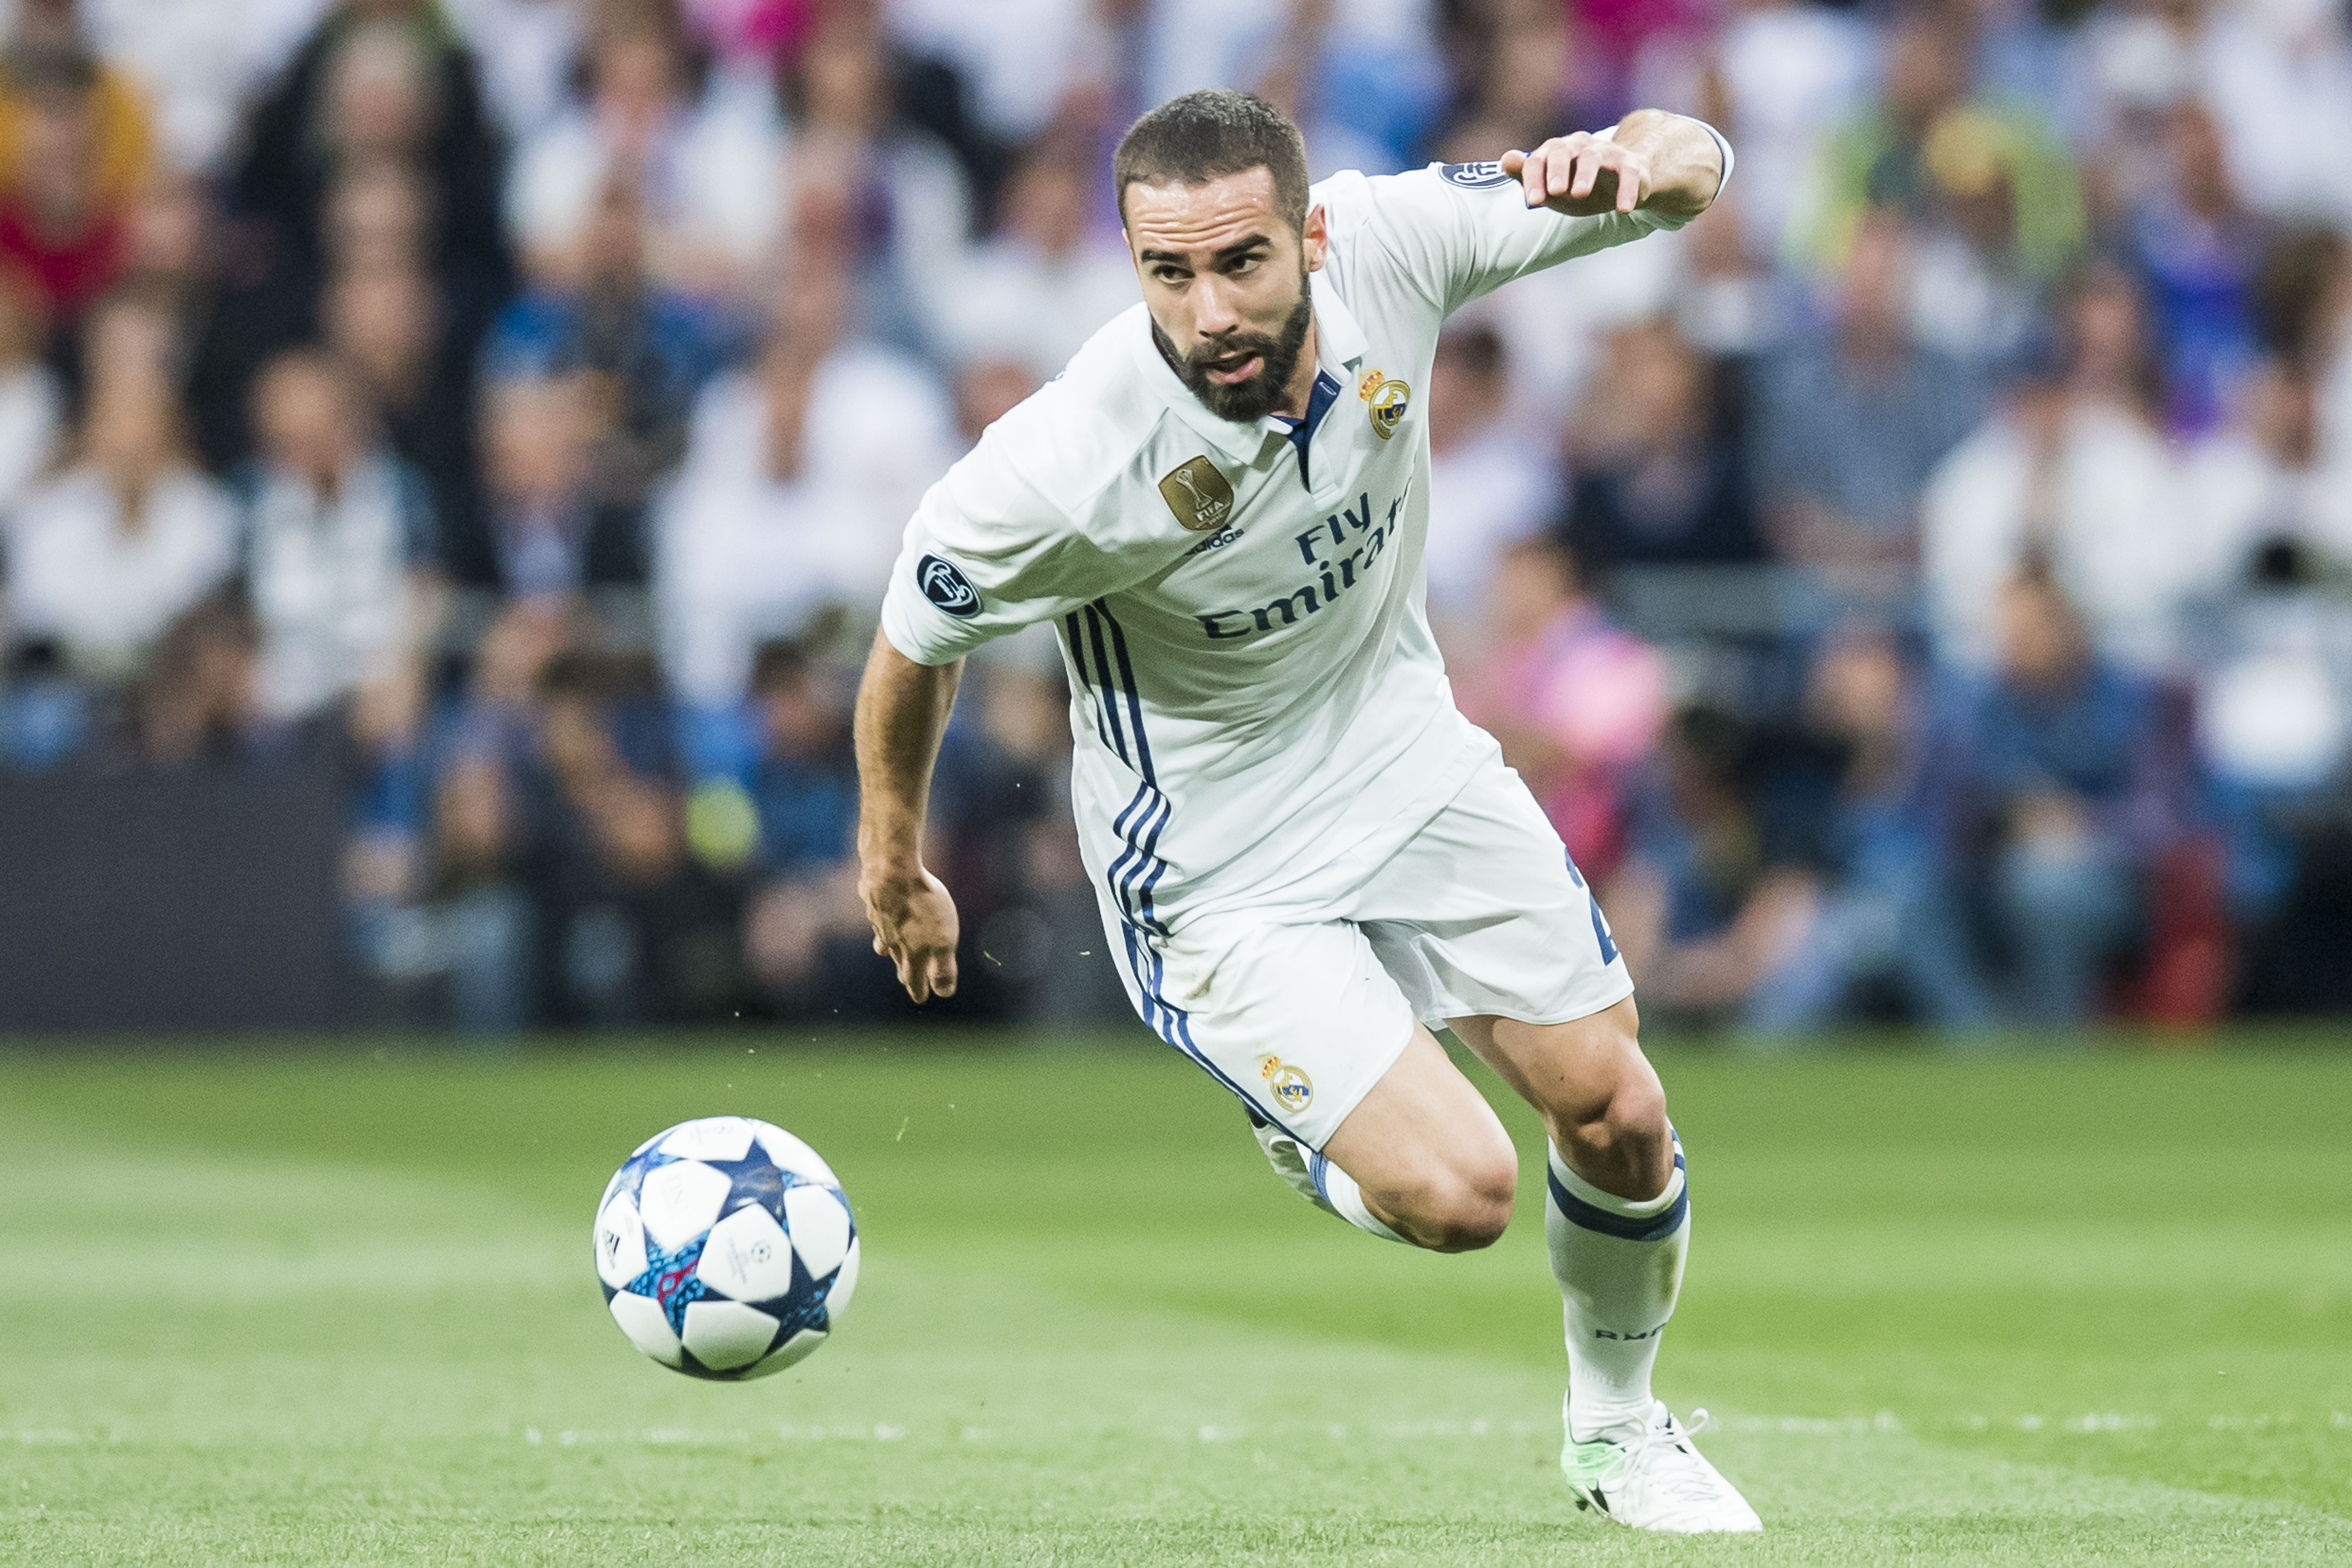 News Dani Carvajal in action for Genuine Madrid in opposition to Atletico in the Champions League in Might 2017.